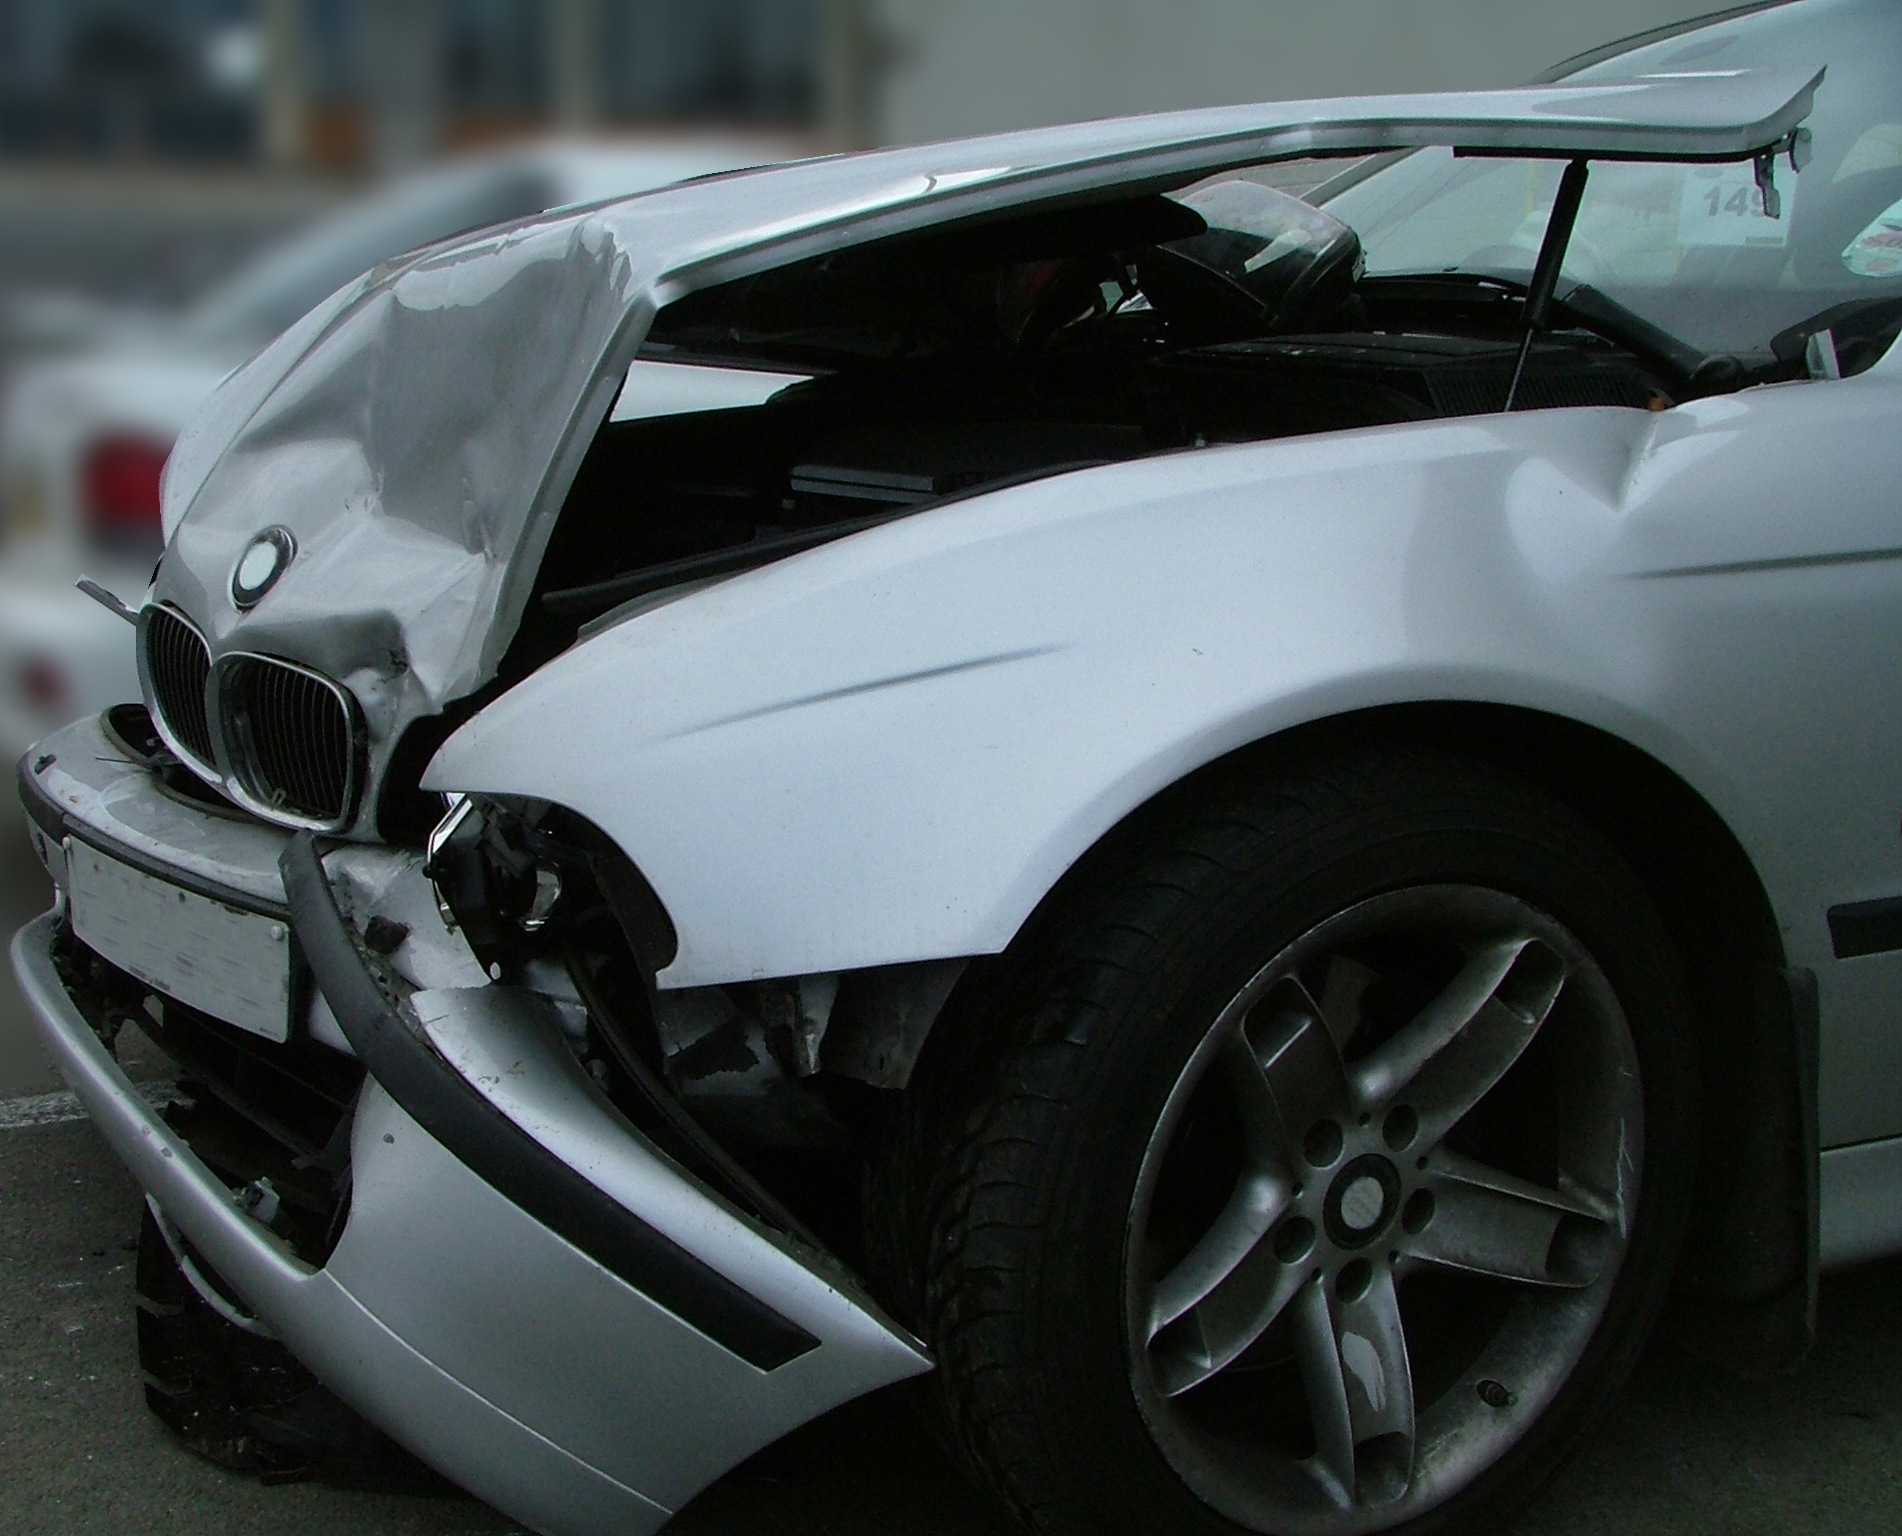 Wilton Manors Car accident attorney